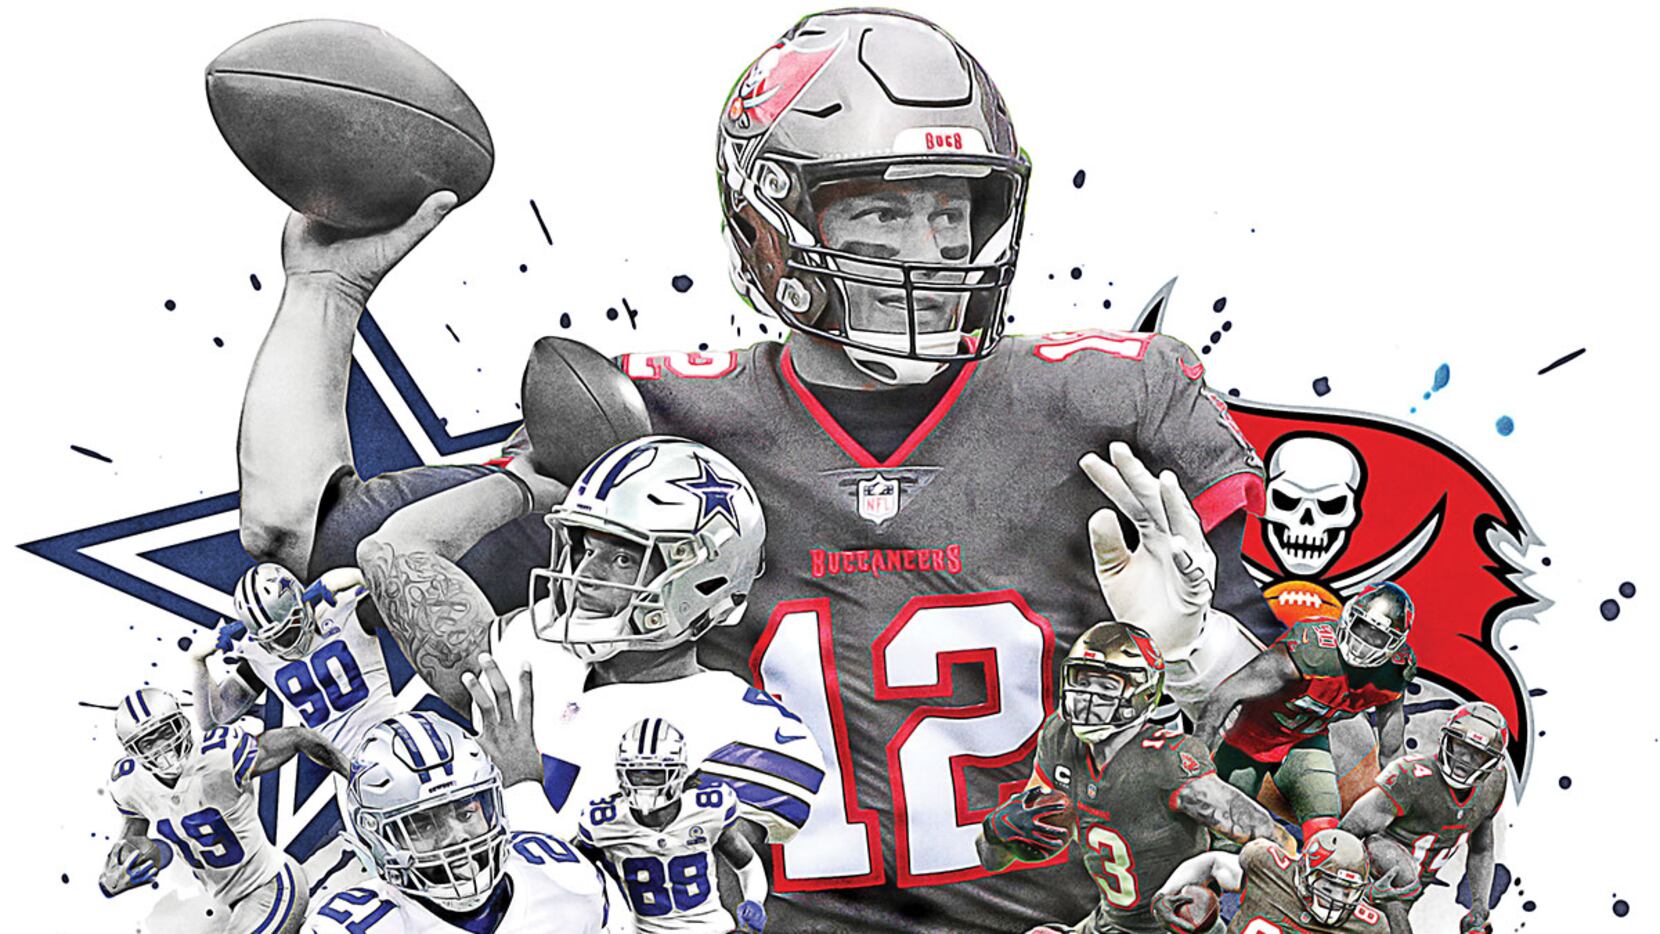 Spirits are high as Dak Prescott's return game nears, but are Cowboys  really ready for Buccaneers?